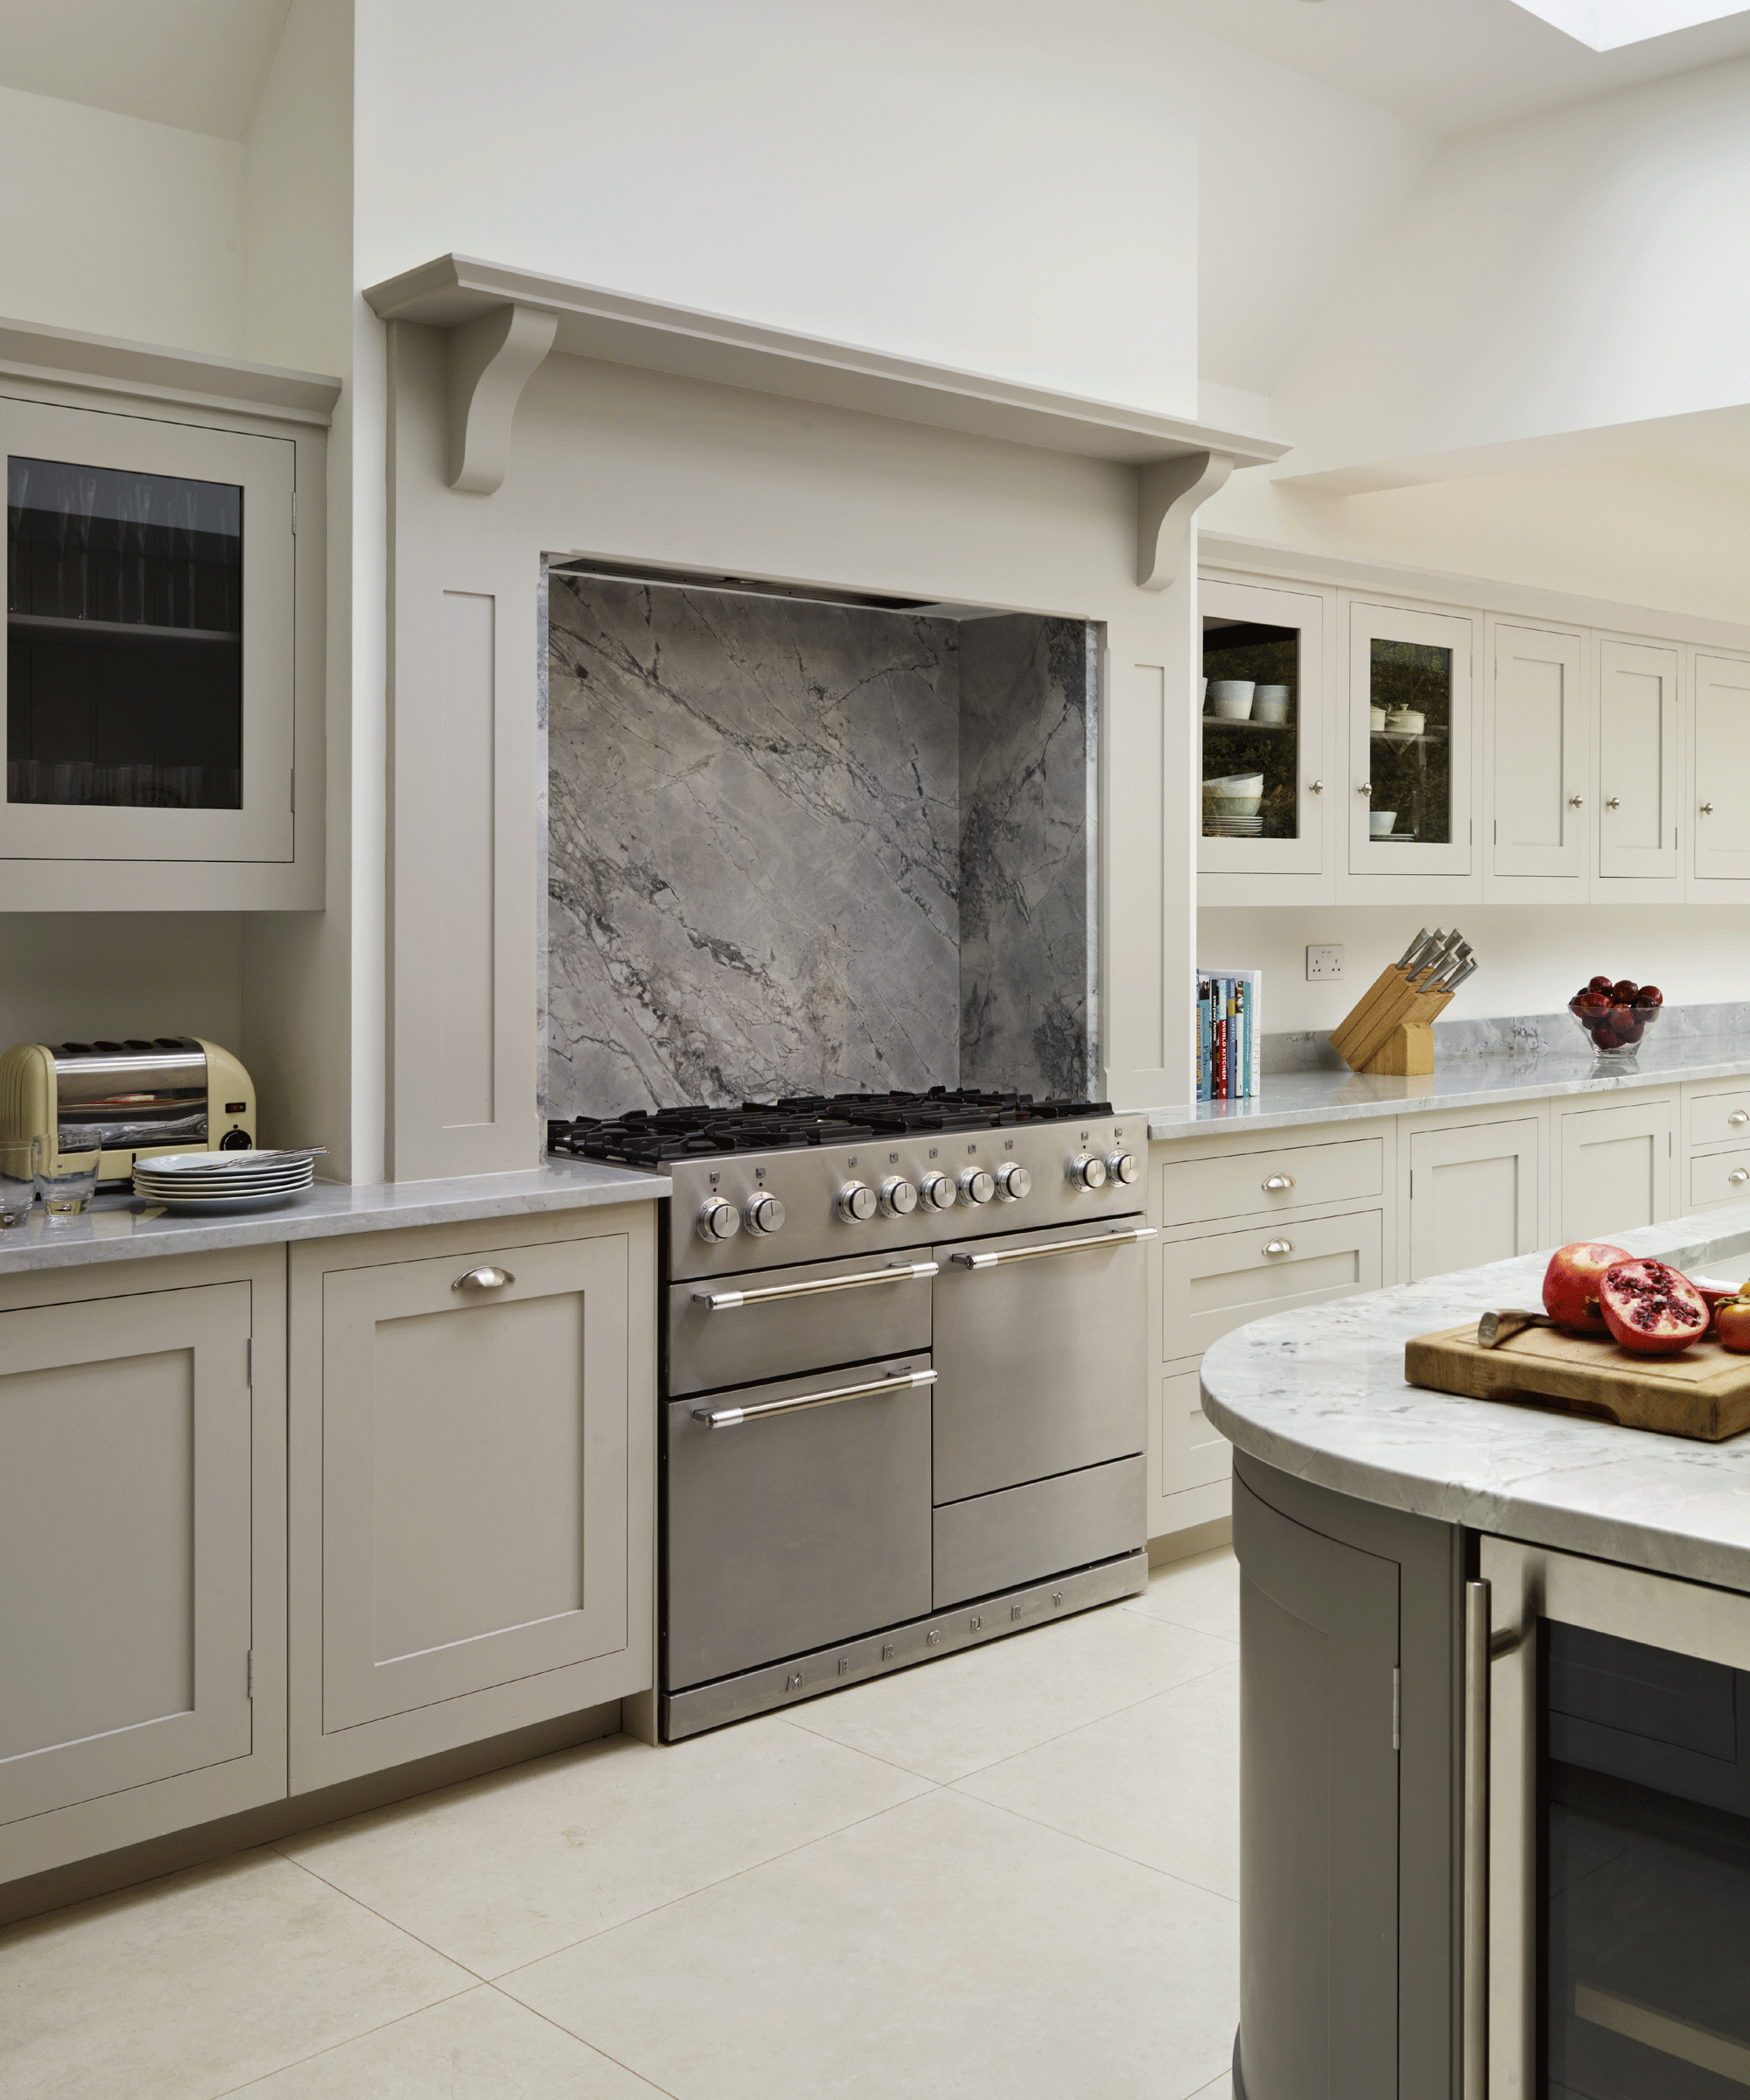 A kitchen with recessed range cooker in chimney breast